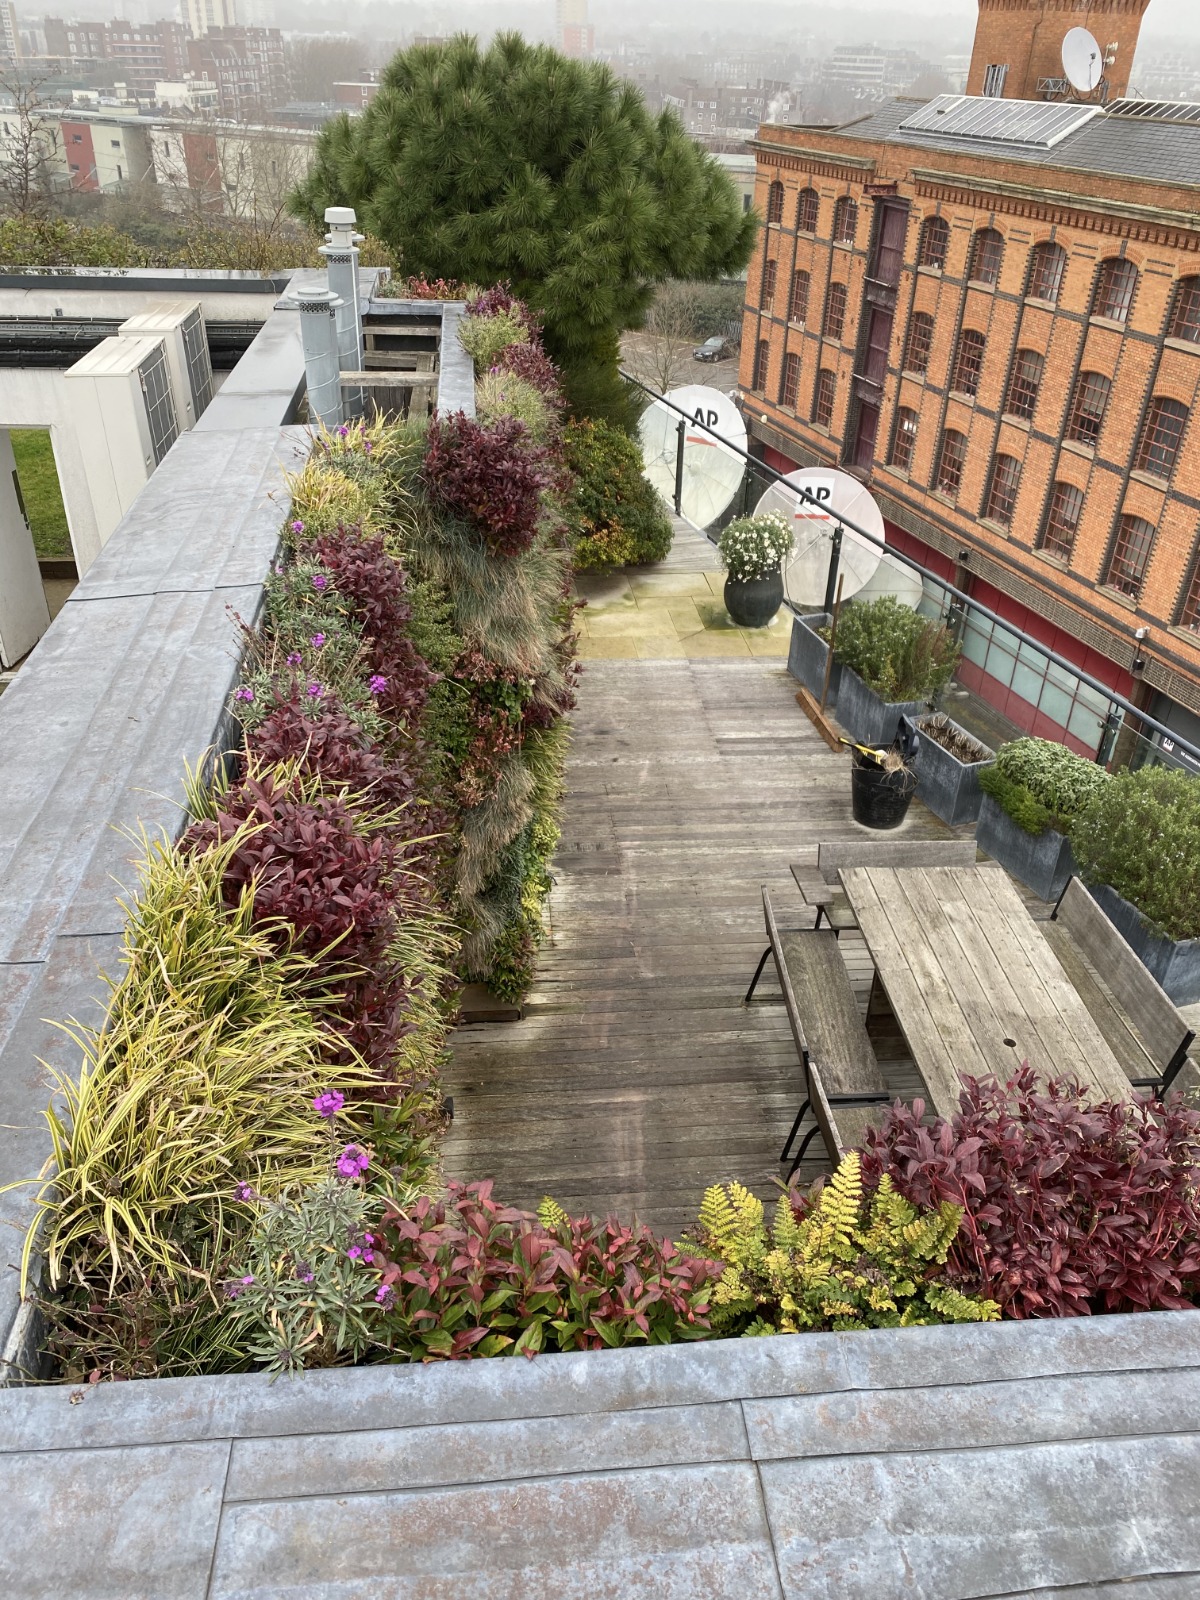 living walls for a roof garden bring the wow factor as well as helping biodiversity in urban areas